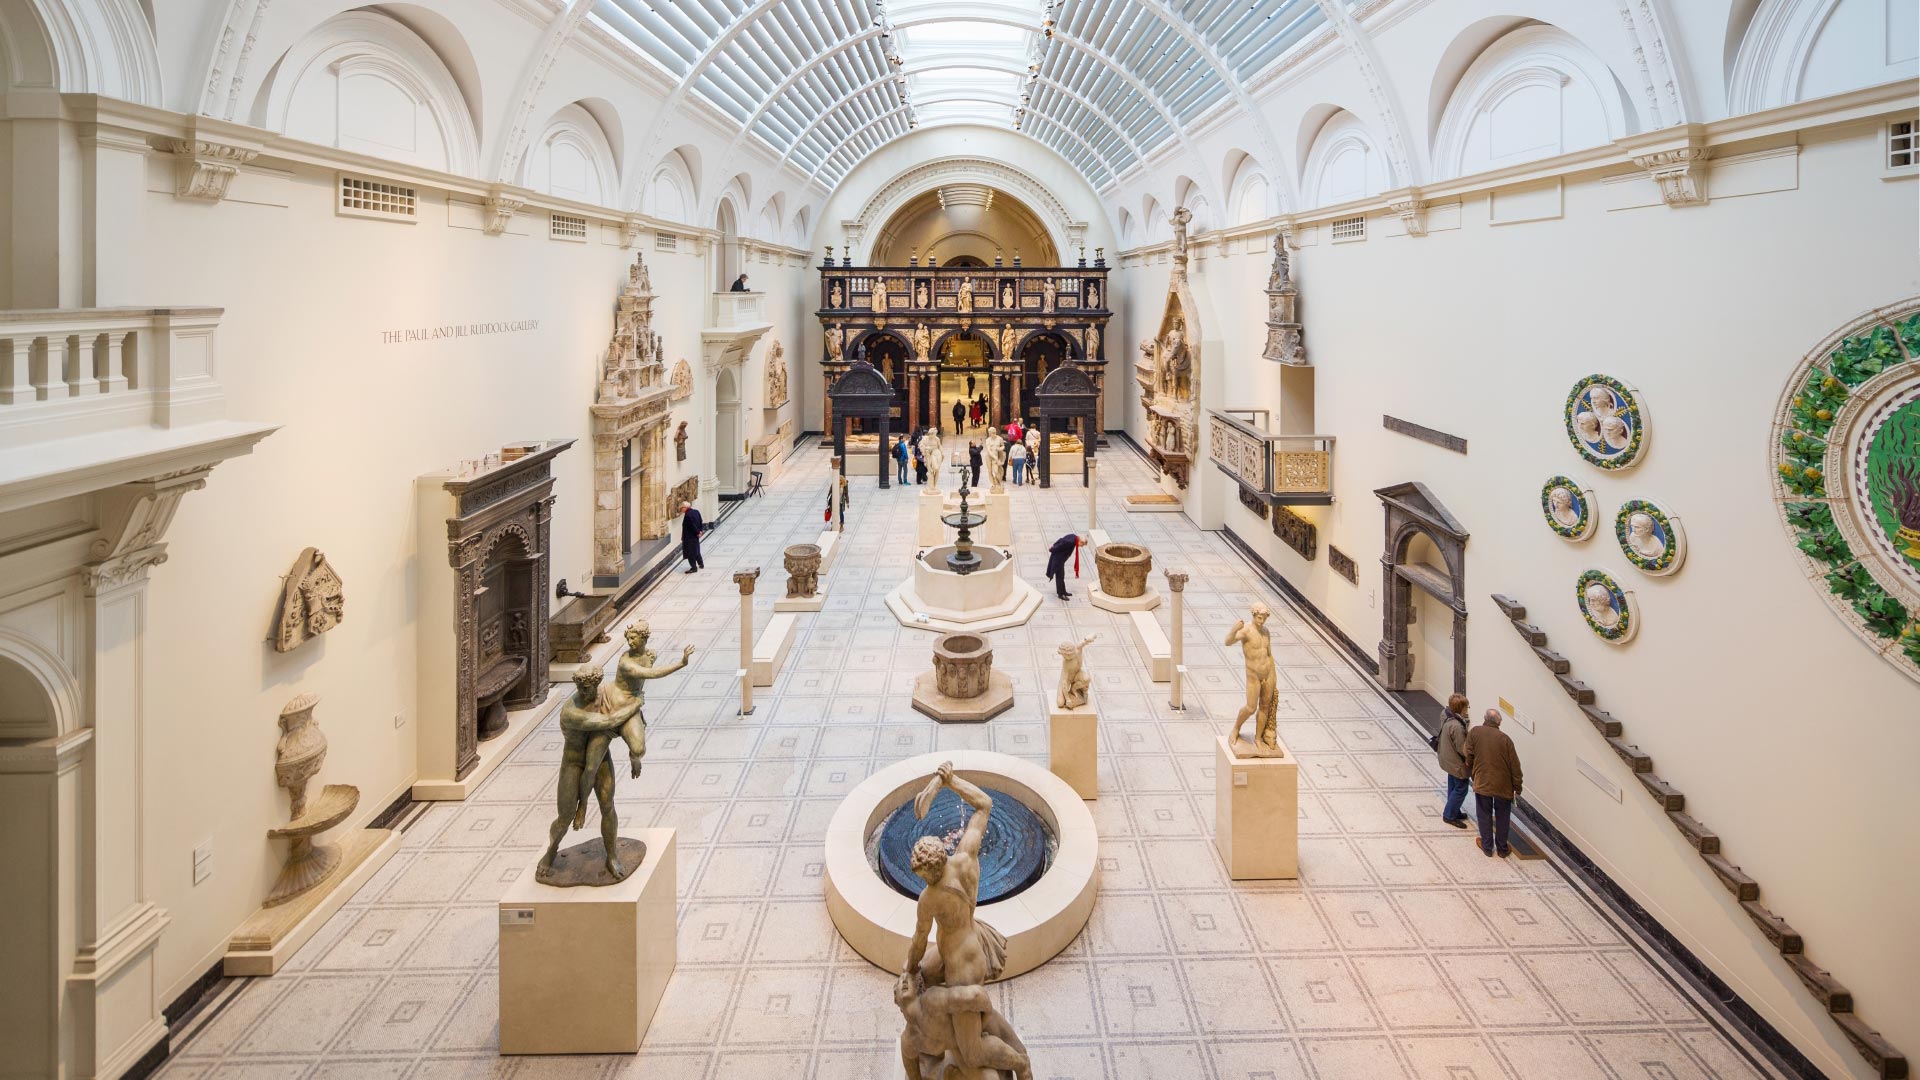 A vast light-filled white hall at Victoria and Albert Museum, featuring  sculptures and statues on pedestals, artefacts on walls and a curved, glass roof.